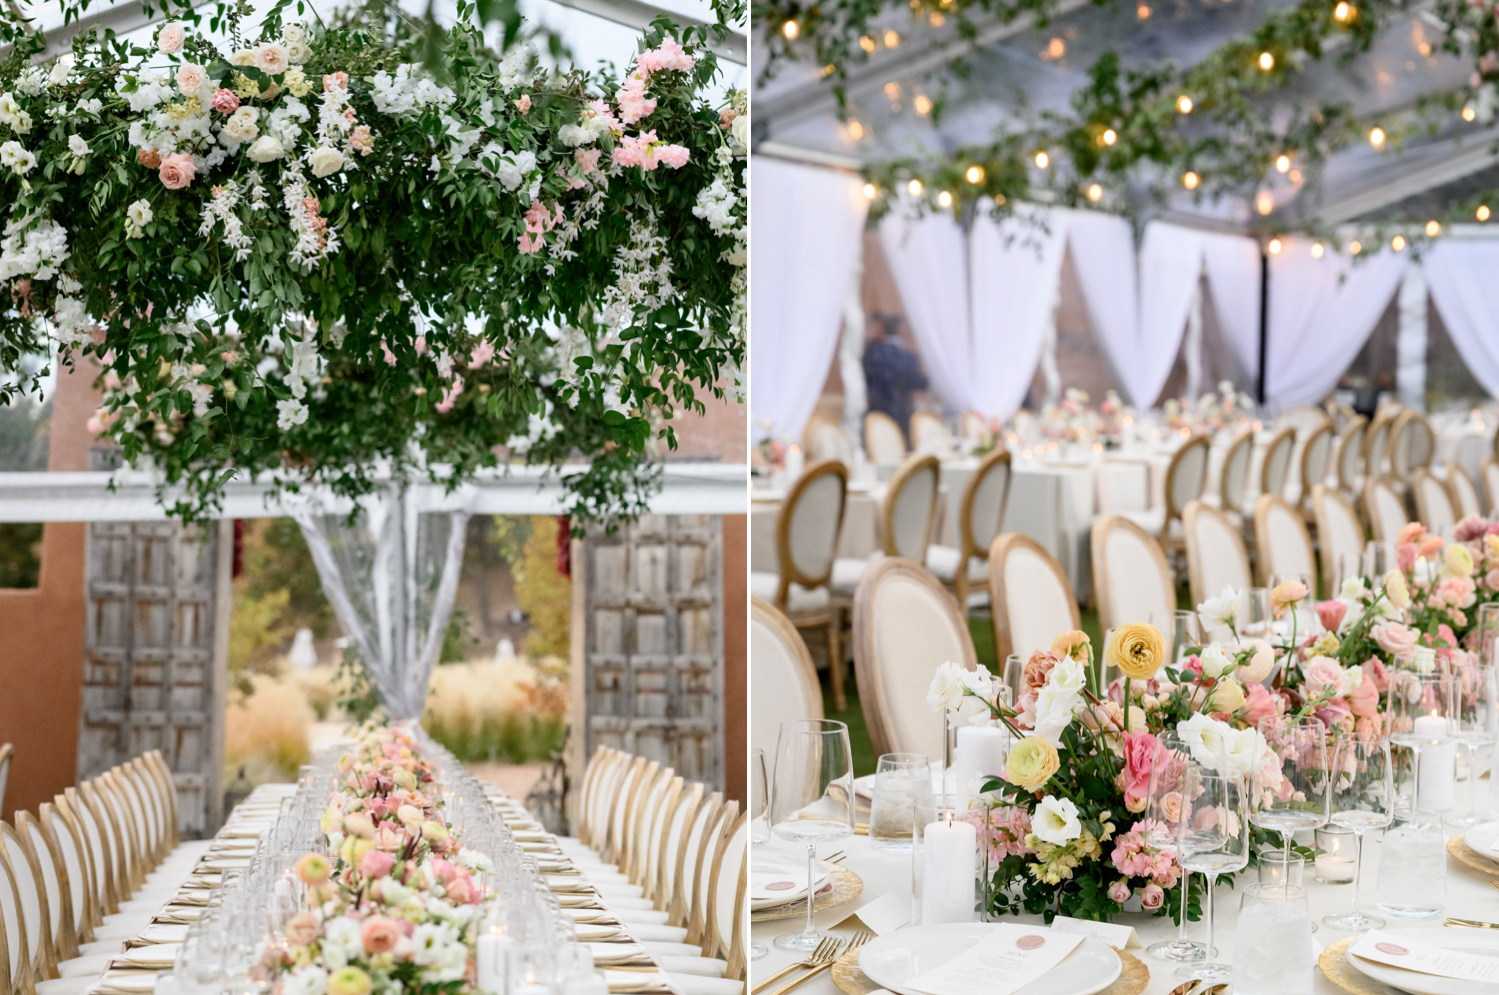 stunning greenery and white and pastel florals hang overhead in the reception tent, as ore floral centerpieces line the table 